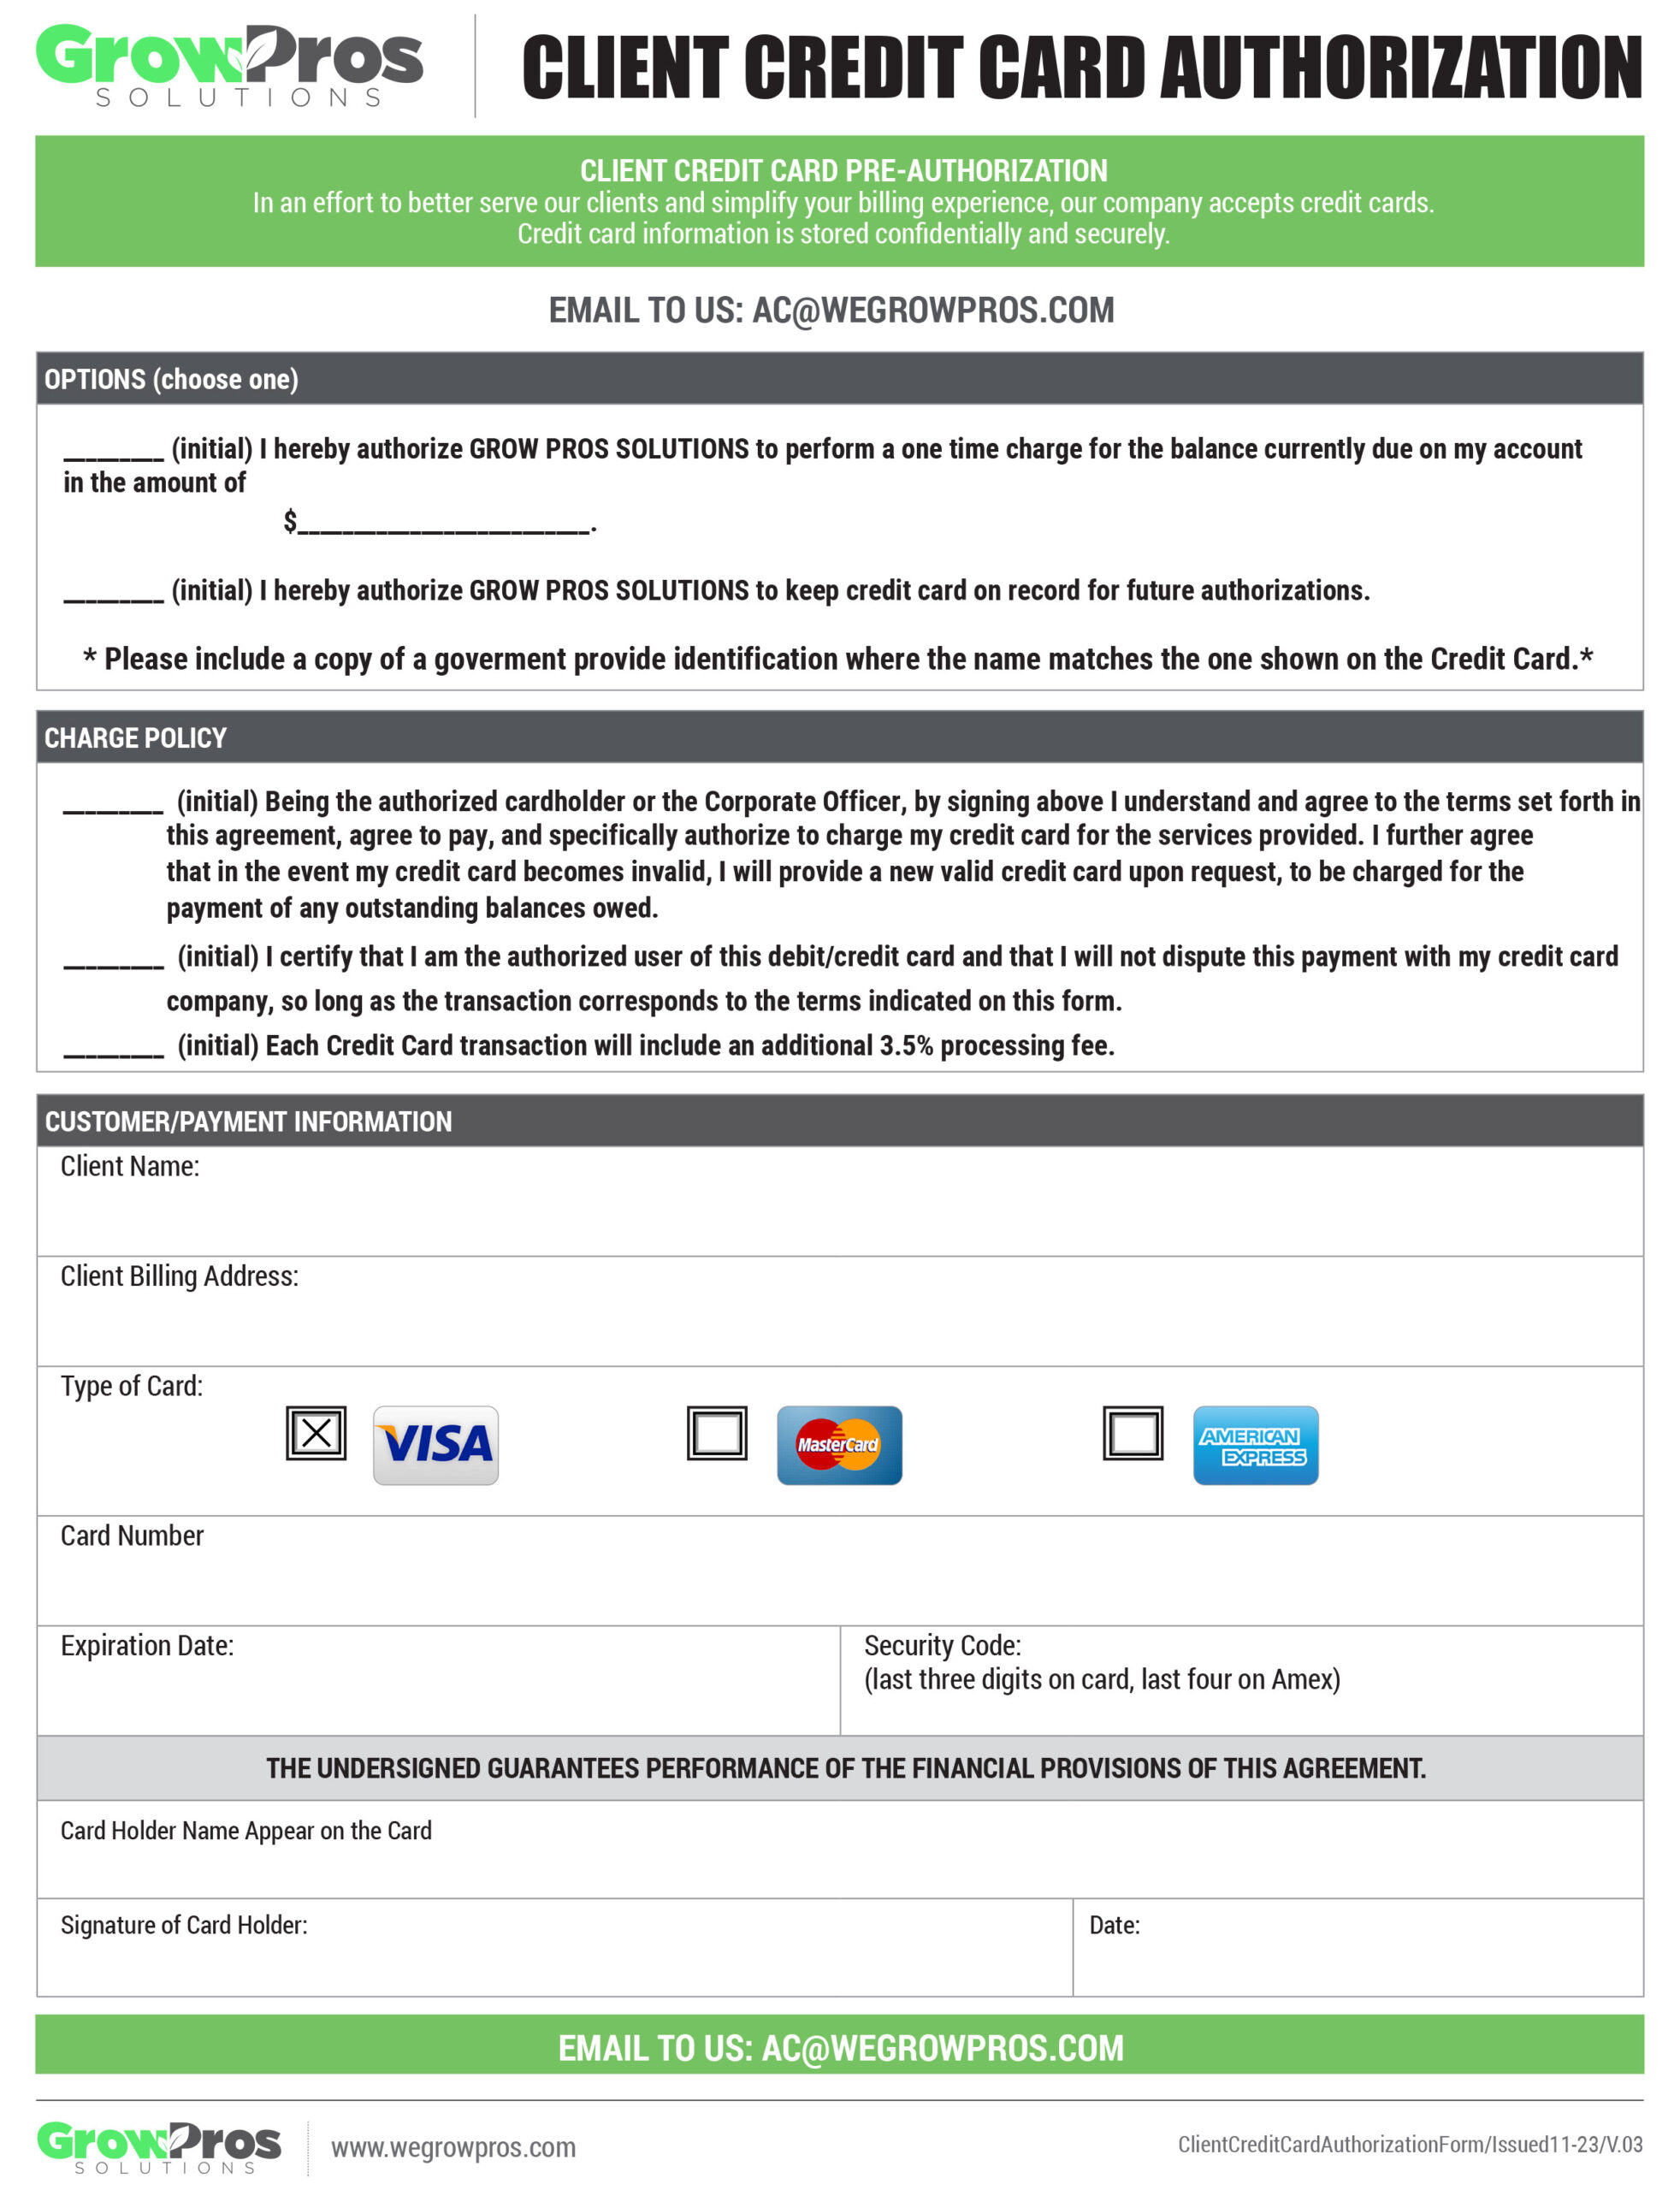 GPS Credit Card Authorization Form r2 scaled